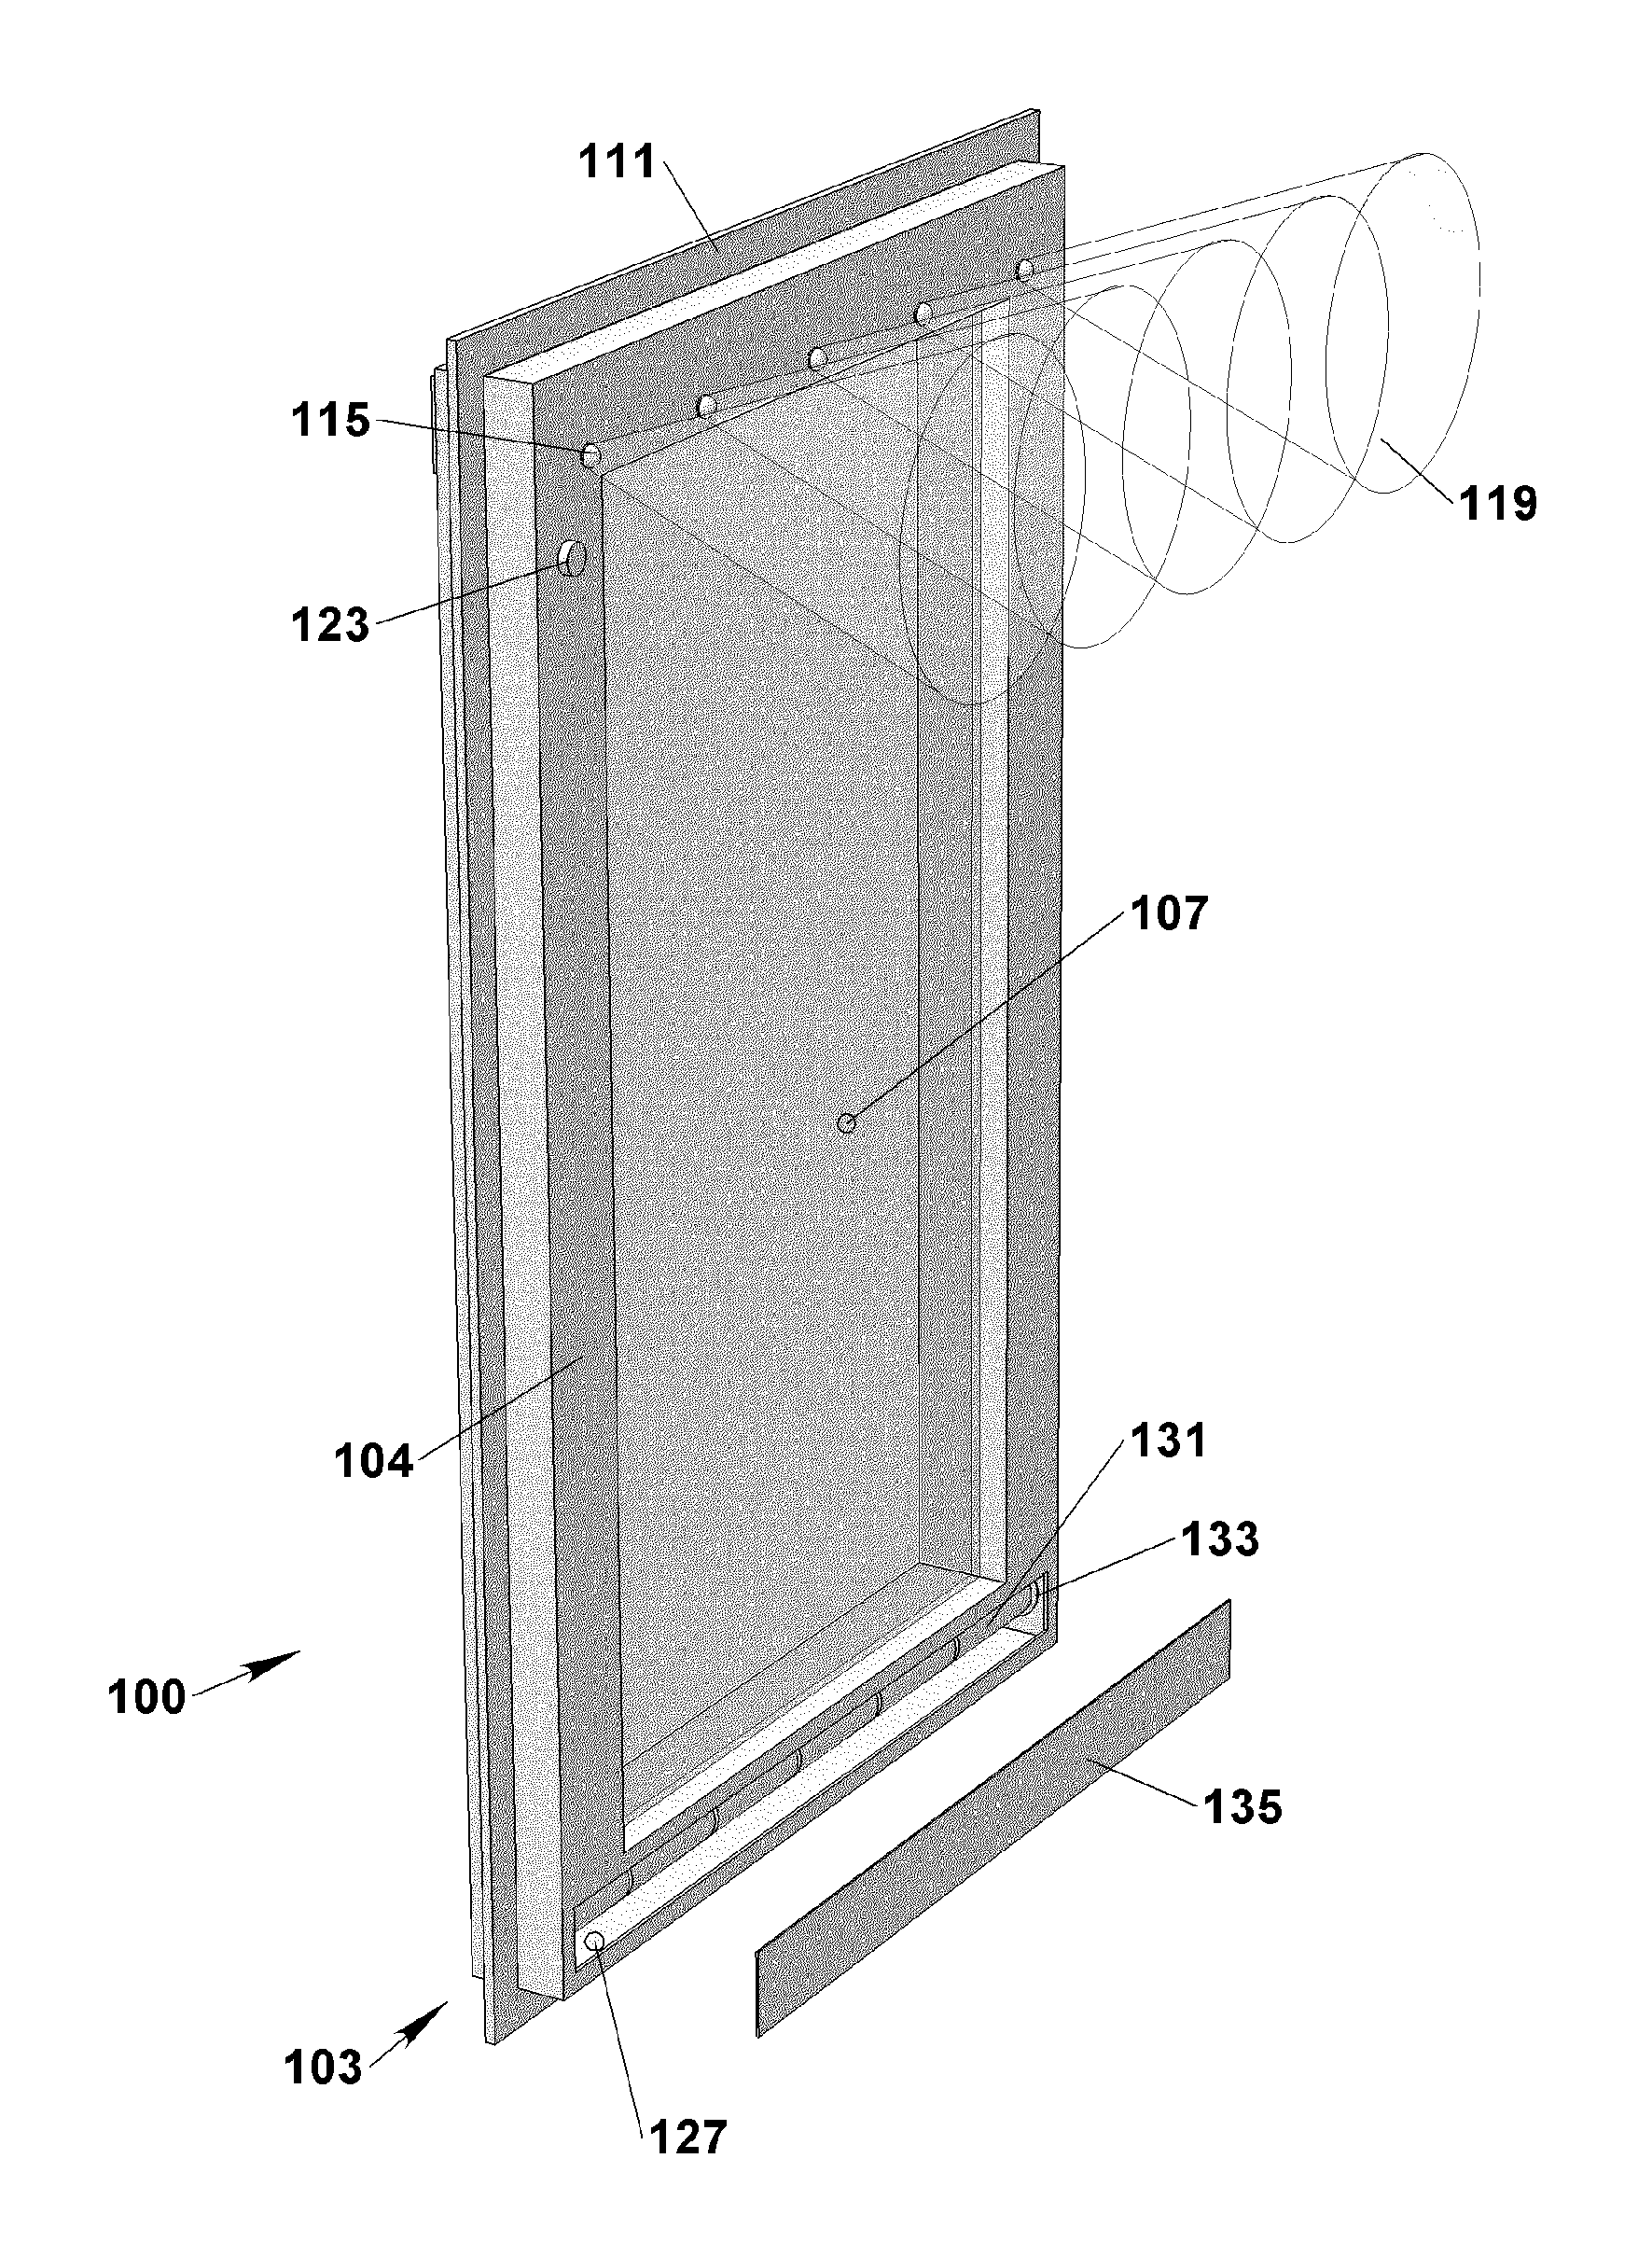 Window frame with integrated solar electric cell and illumination